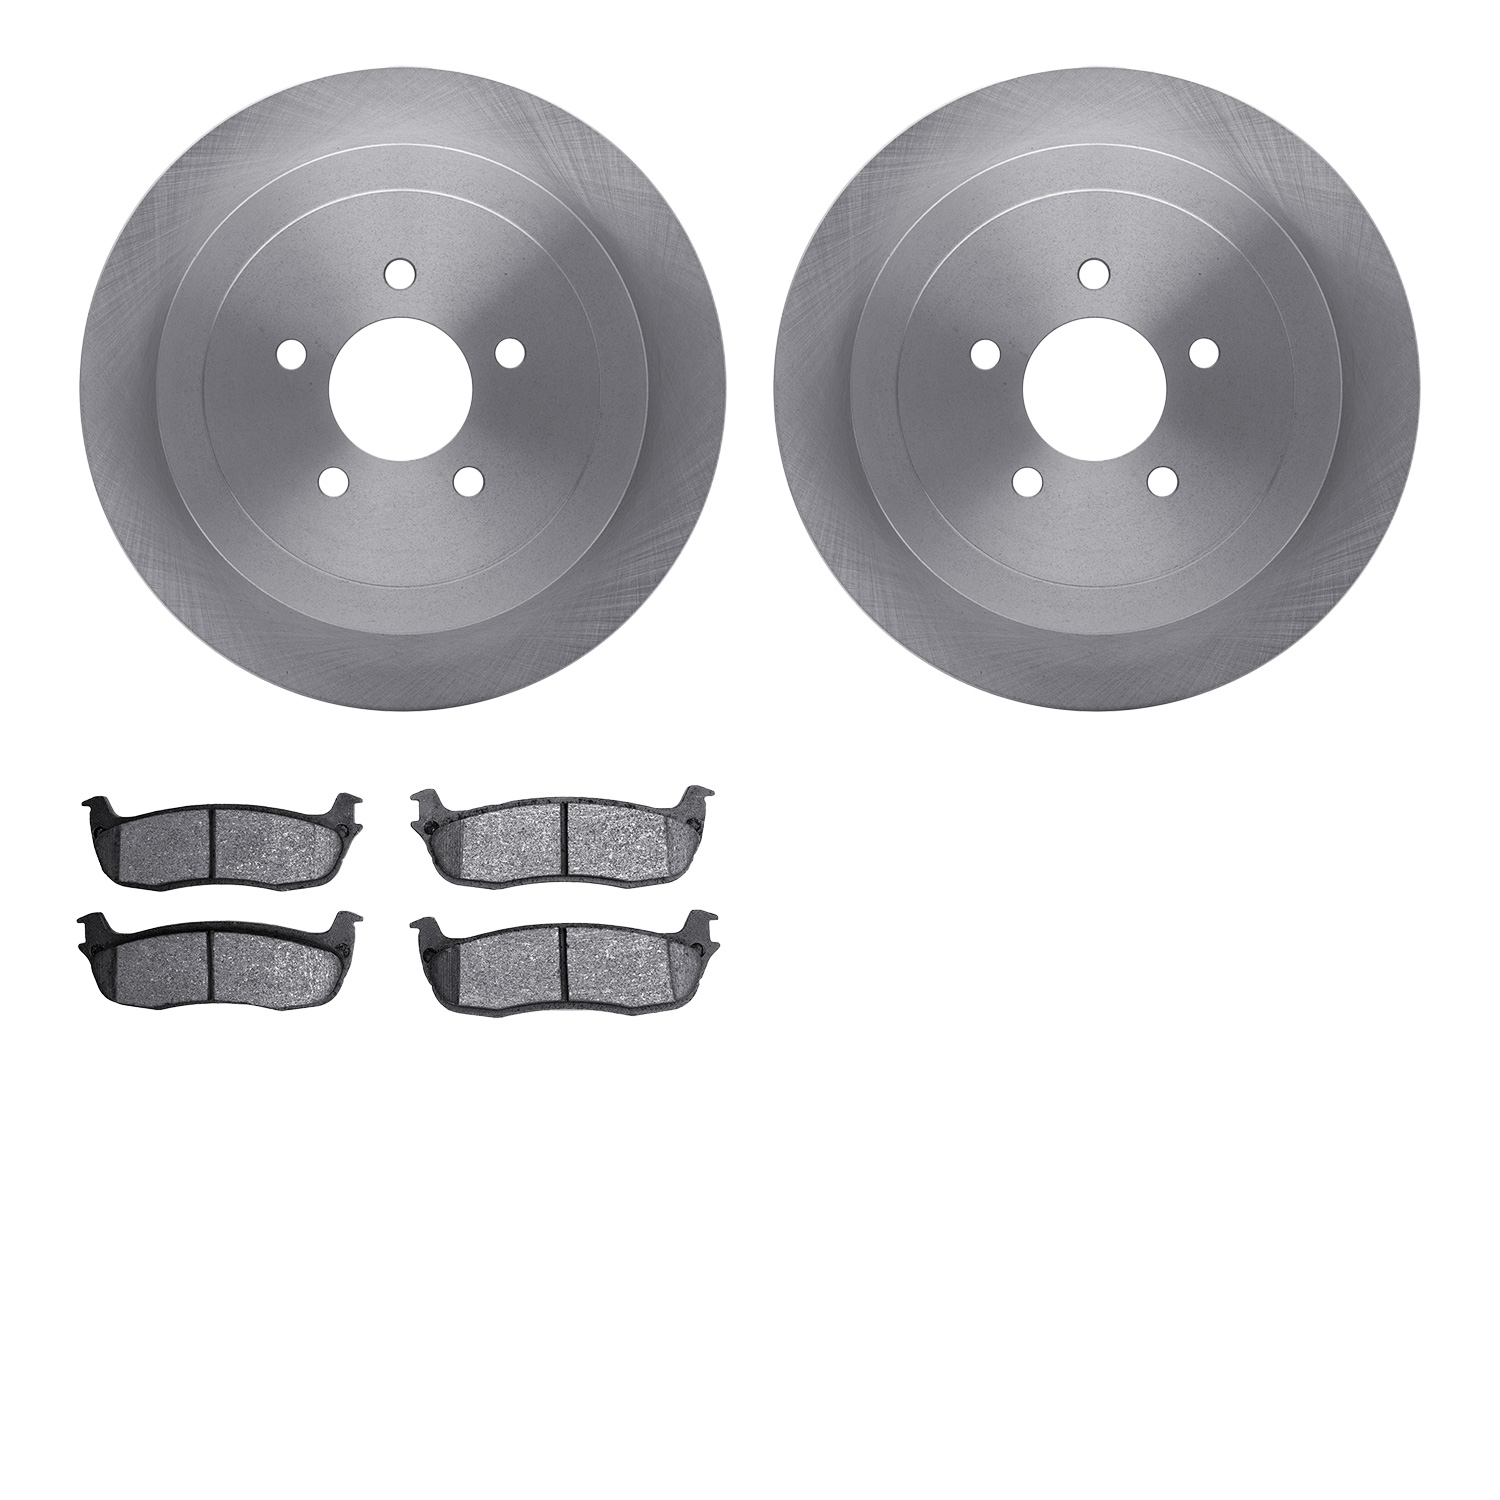 6402-55001 Brake Rotors with Ultimate-Duty Brake Pads, 2003-2011 Ford/Lincoln/Mercury/Mazda, Position: Rear